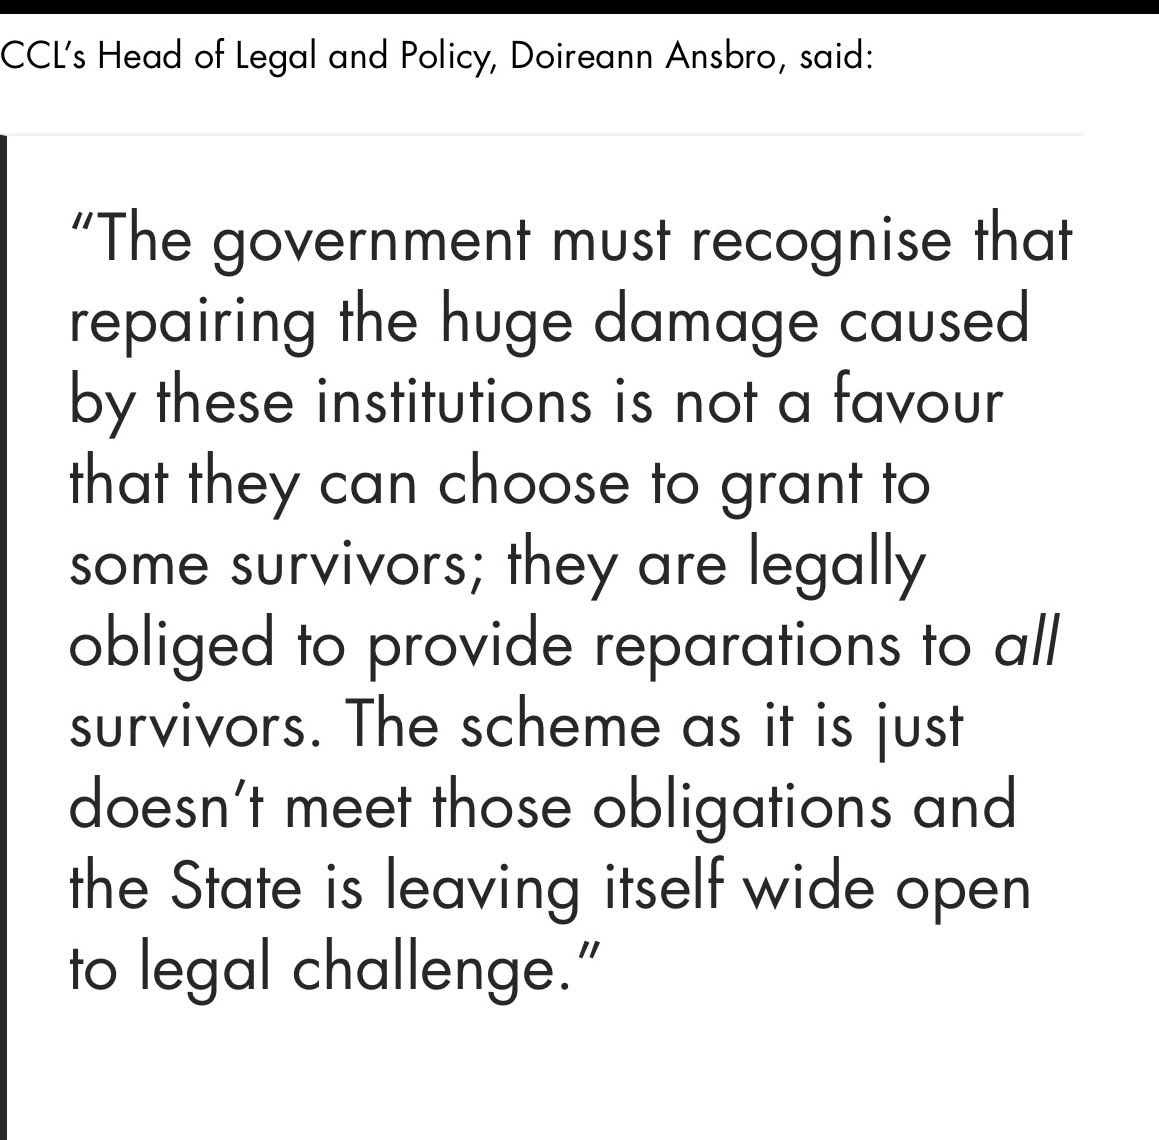 The State cannot pretend they didn’t know - they were warned by excluding 24,000 survivors from #MotherAndBabyHomes it is open to legal challenge placing exchequer funds at risk. @rodericogorman previously settled eight #JudicialReview cases related to Commissions report  
⬇️